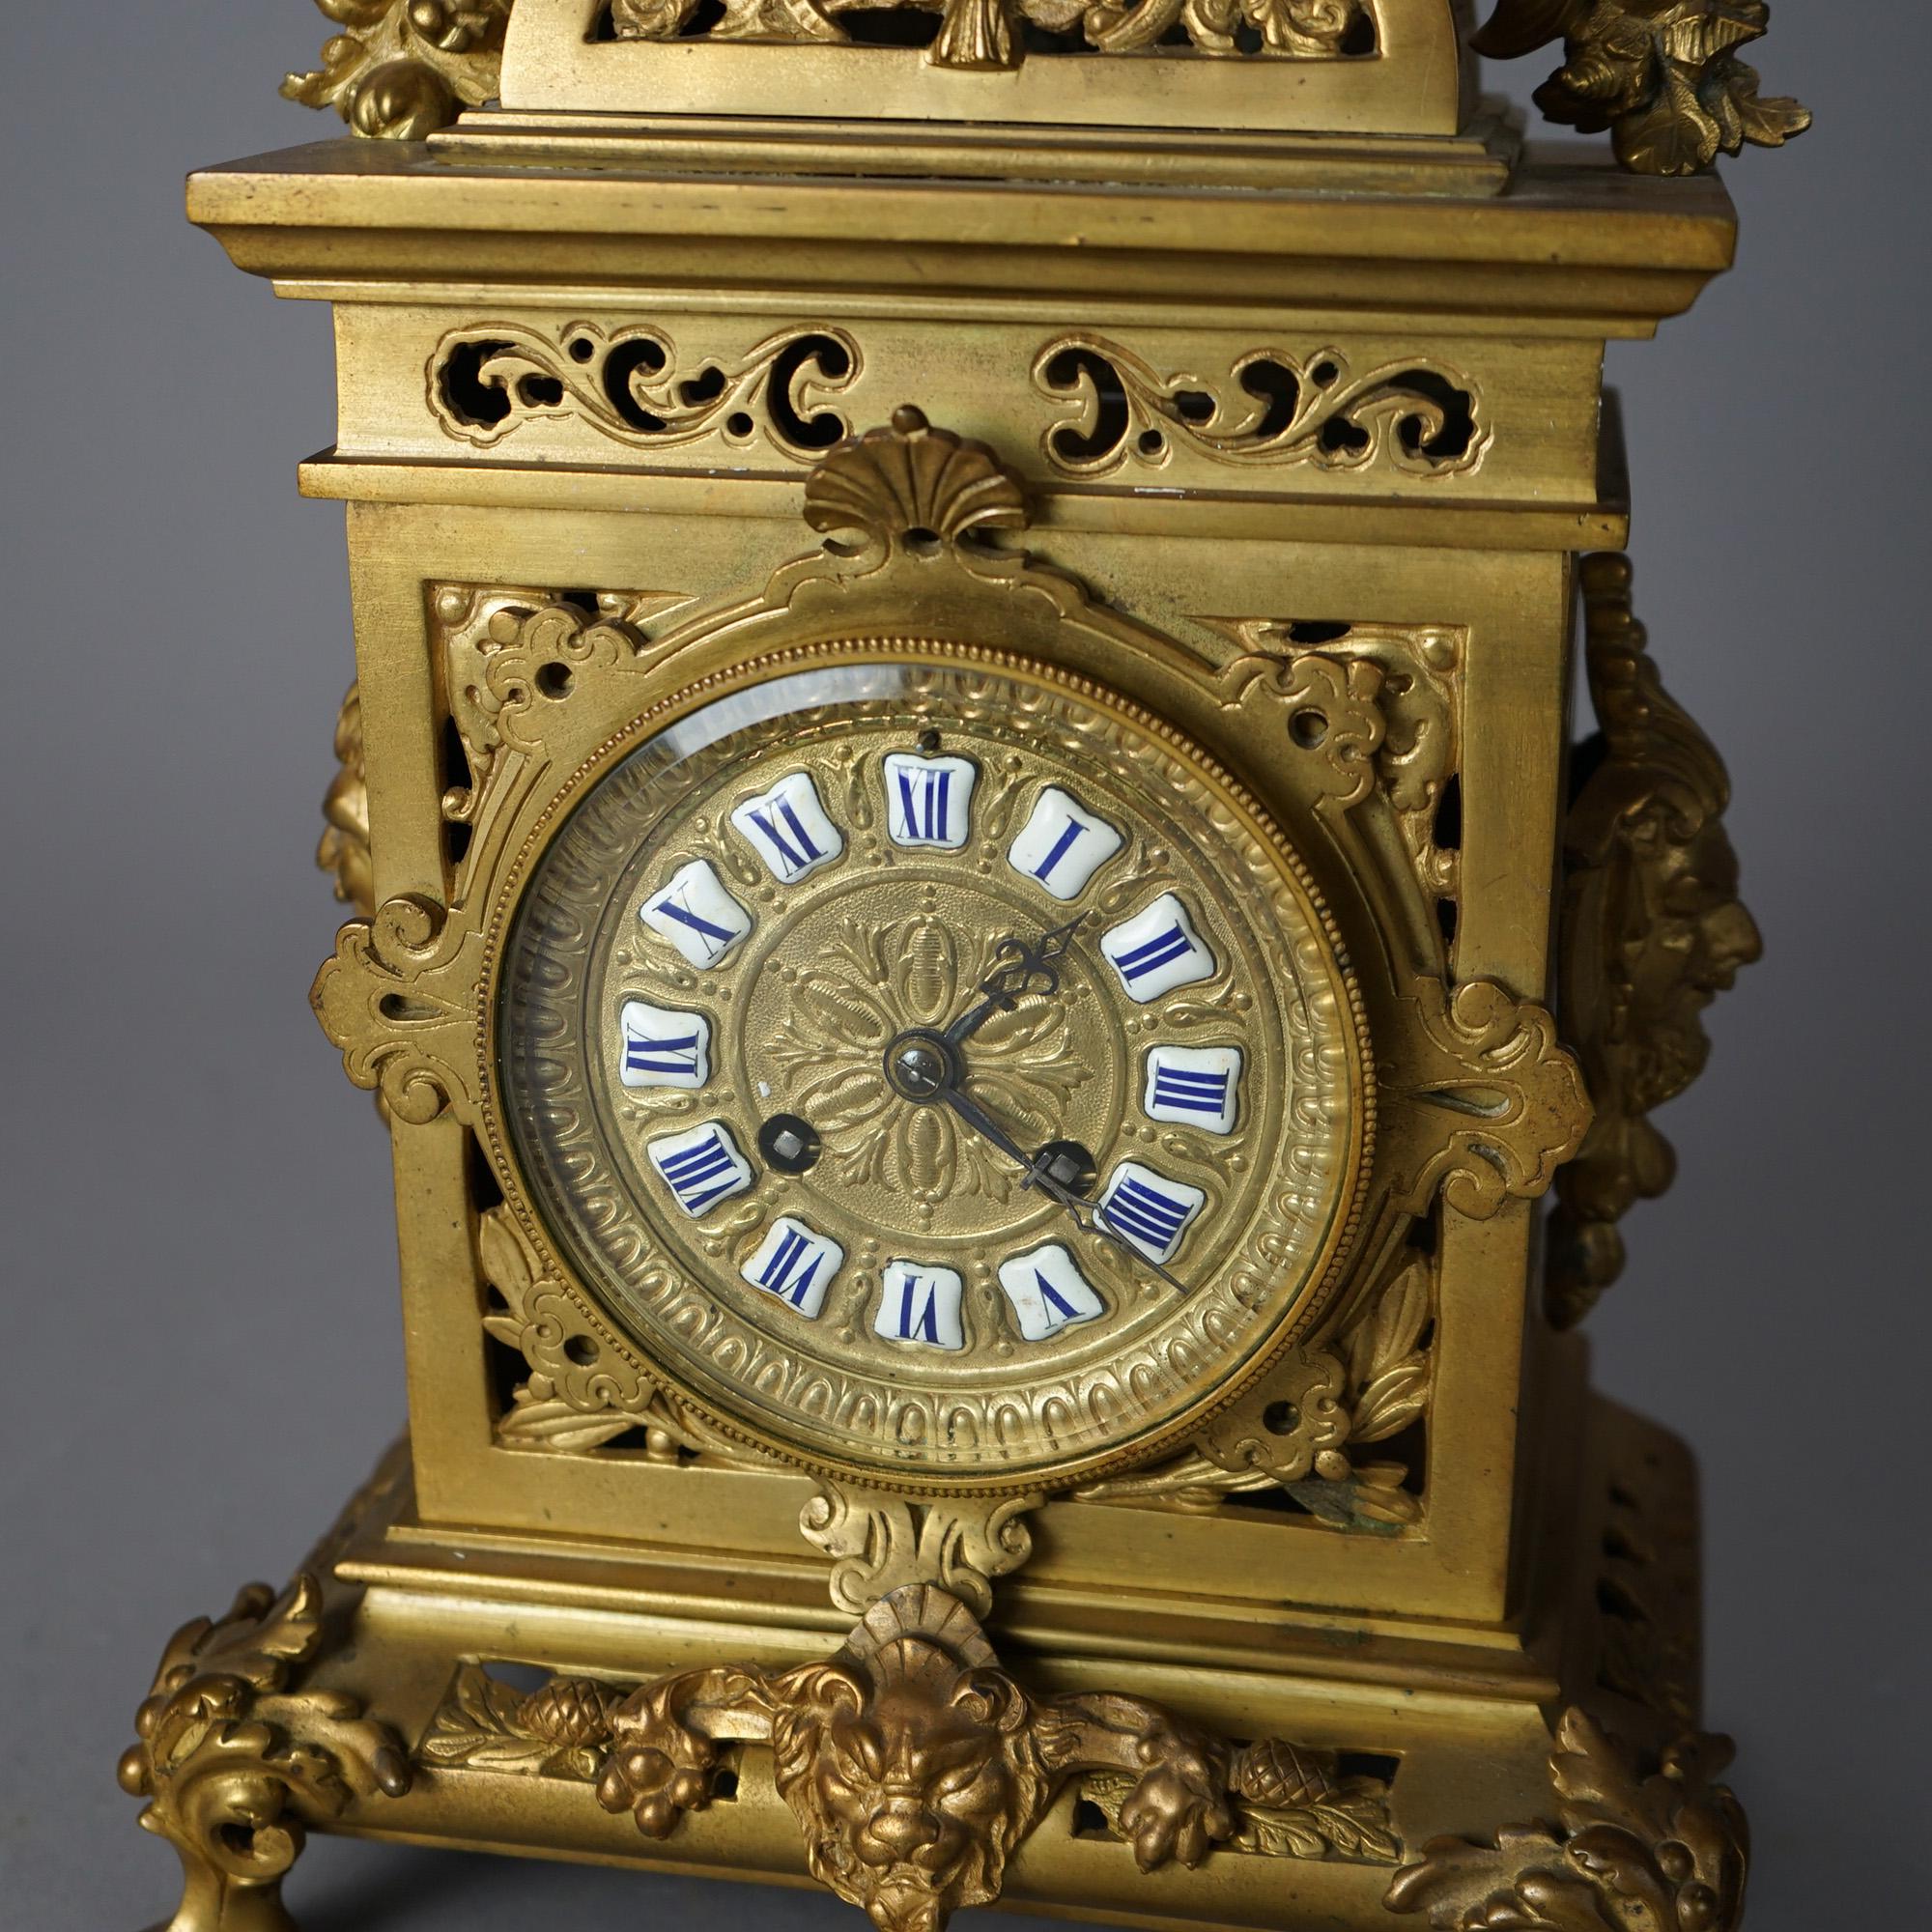 An antique French mantel clock offers gilt cast bonze footed case having battle armor form finial and scroll and foliate elements throughout, 19th century

Measures - 16.5